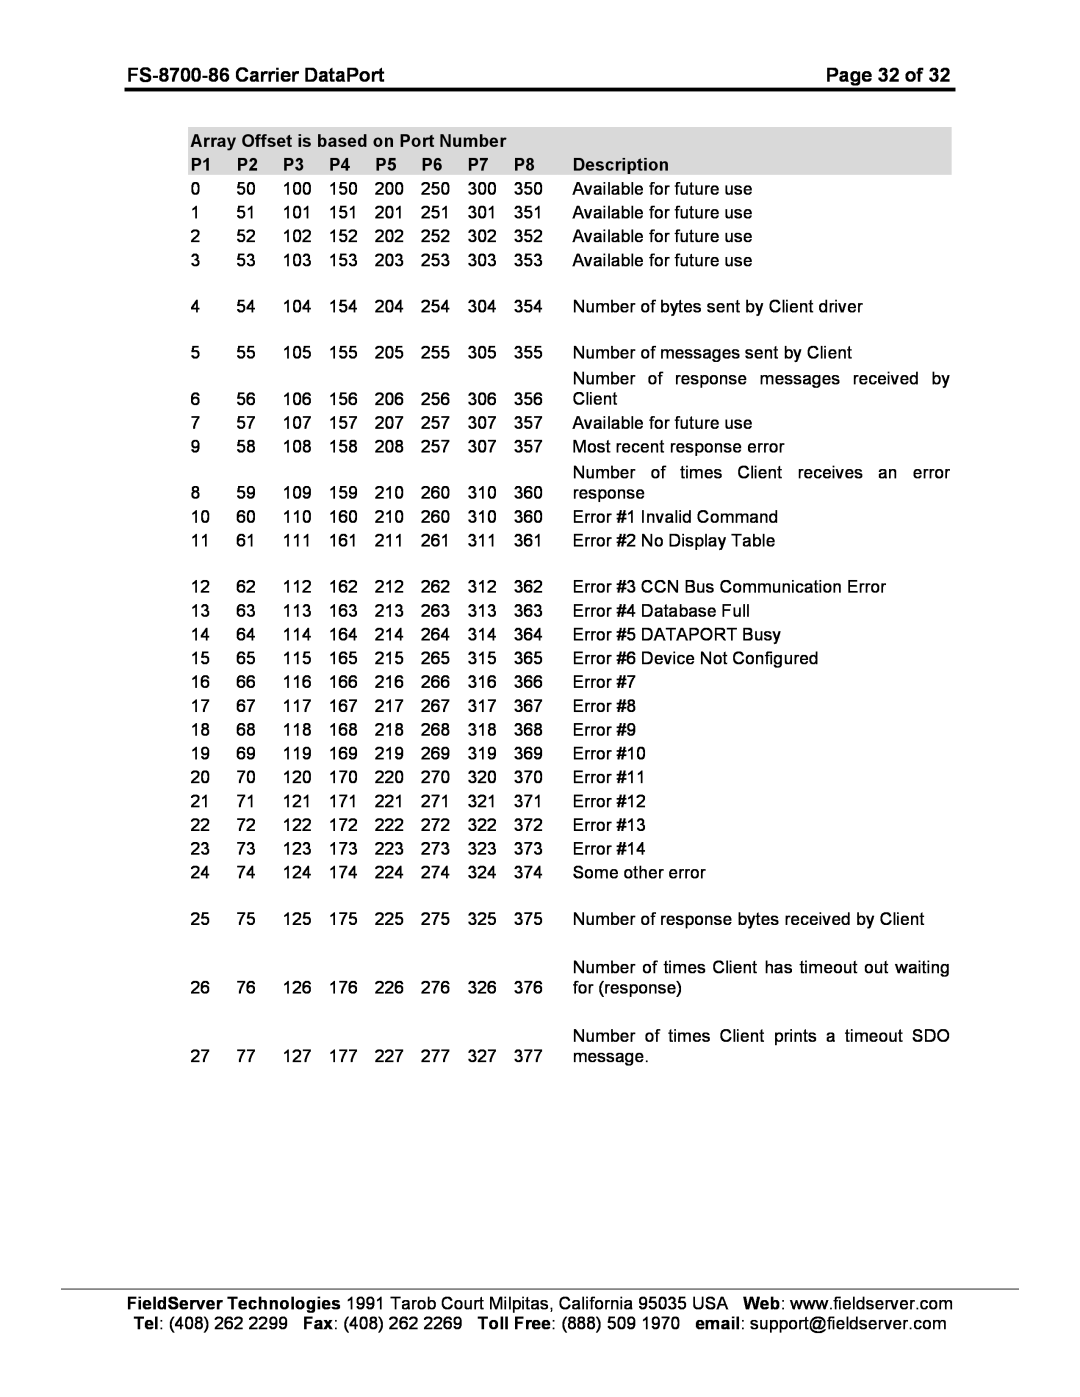 FieldServer instruction manual Page 32 of, FS-8700-86 Carrier DataPort 